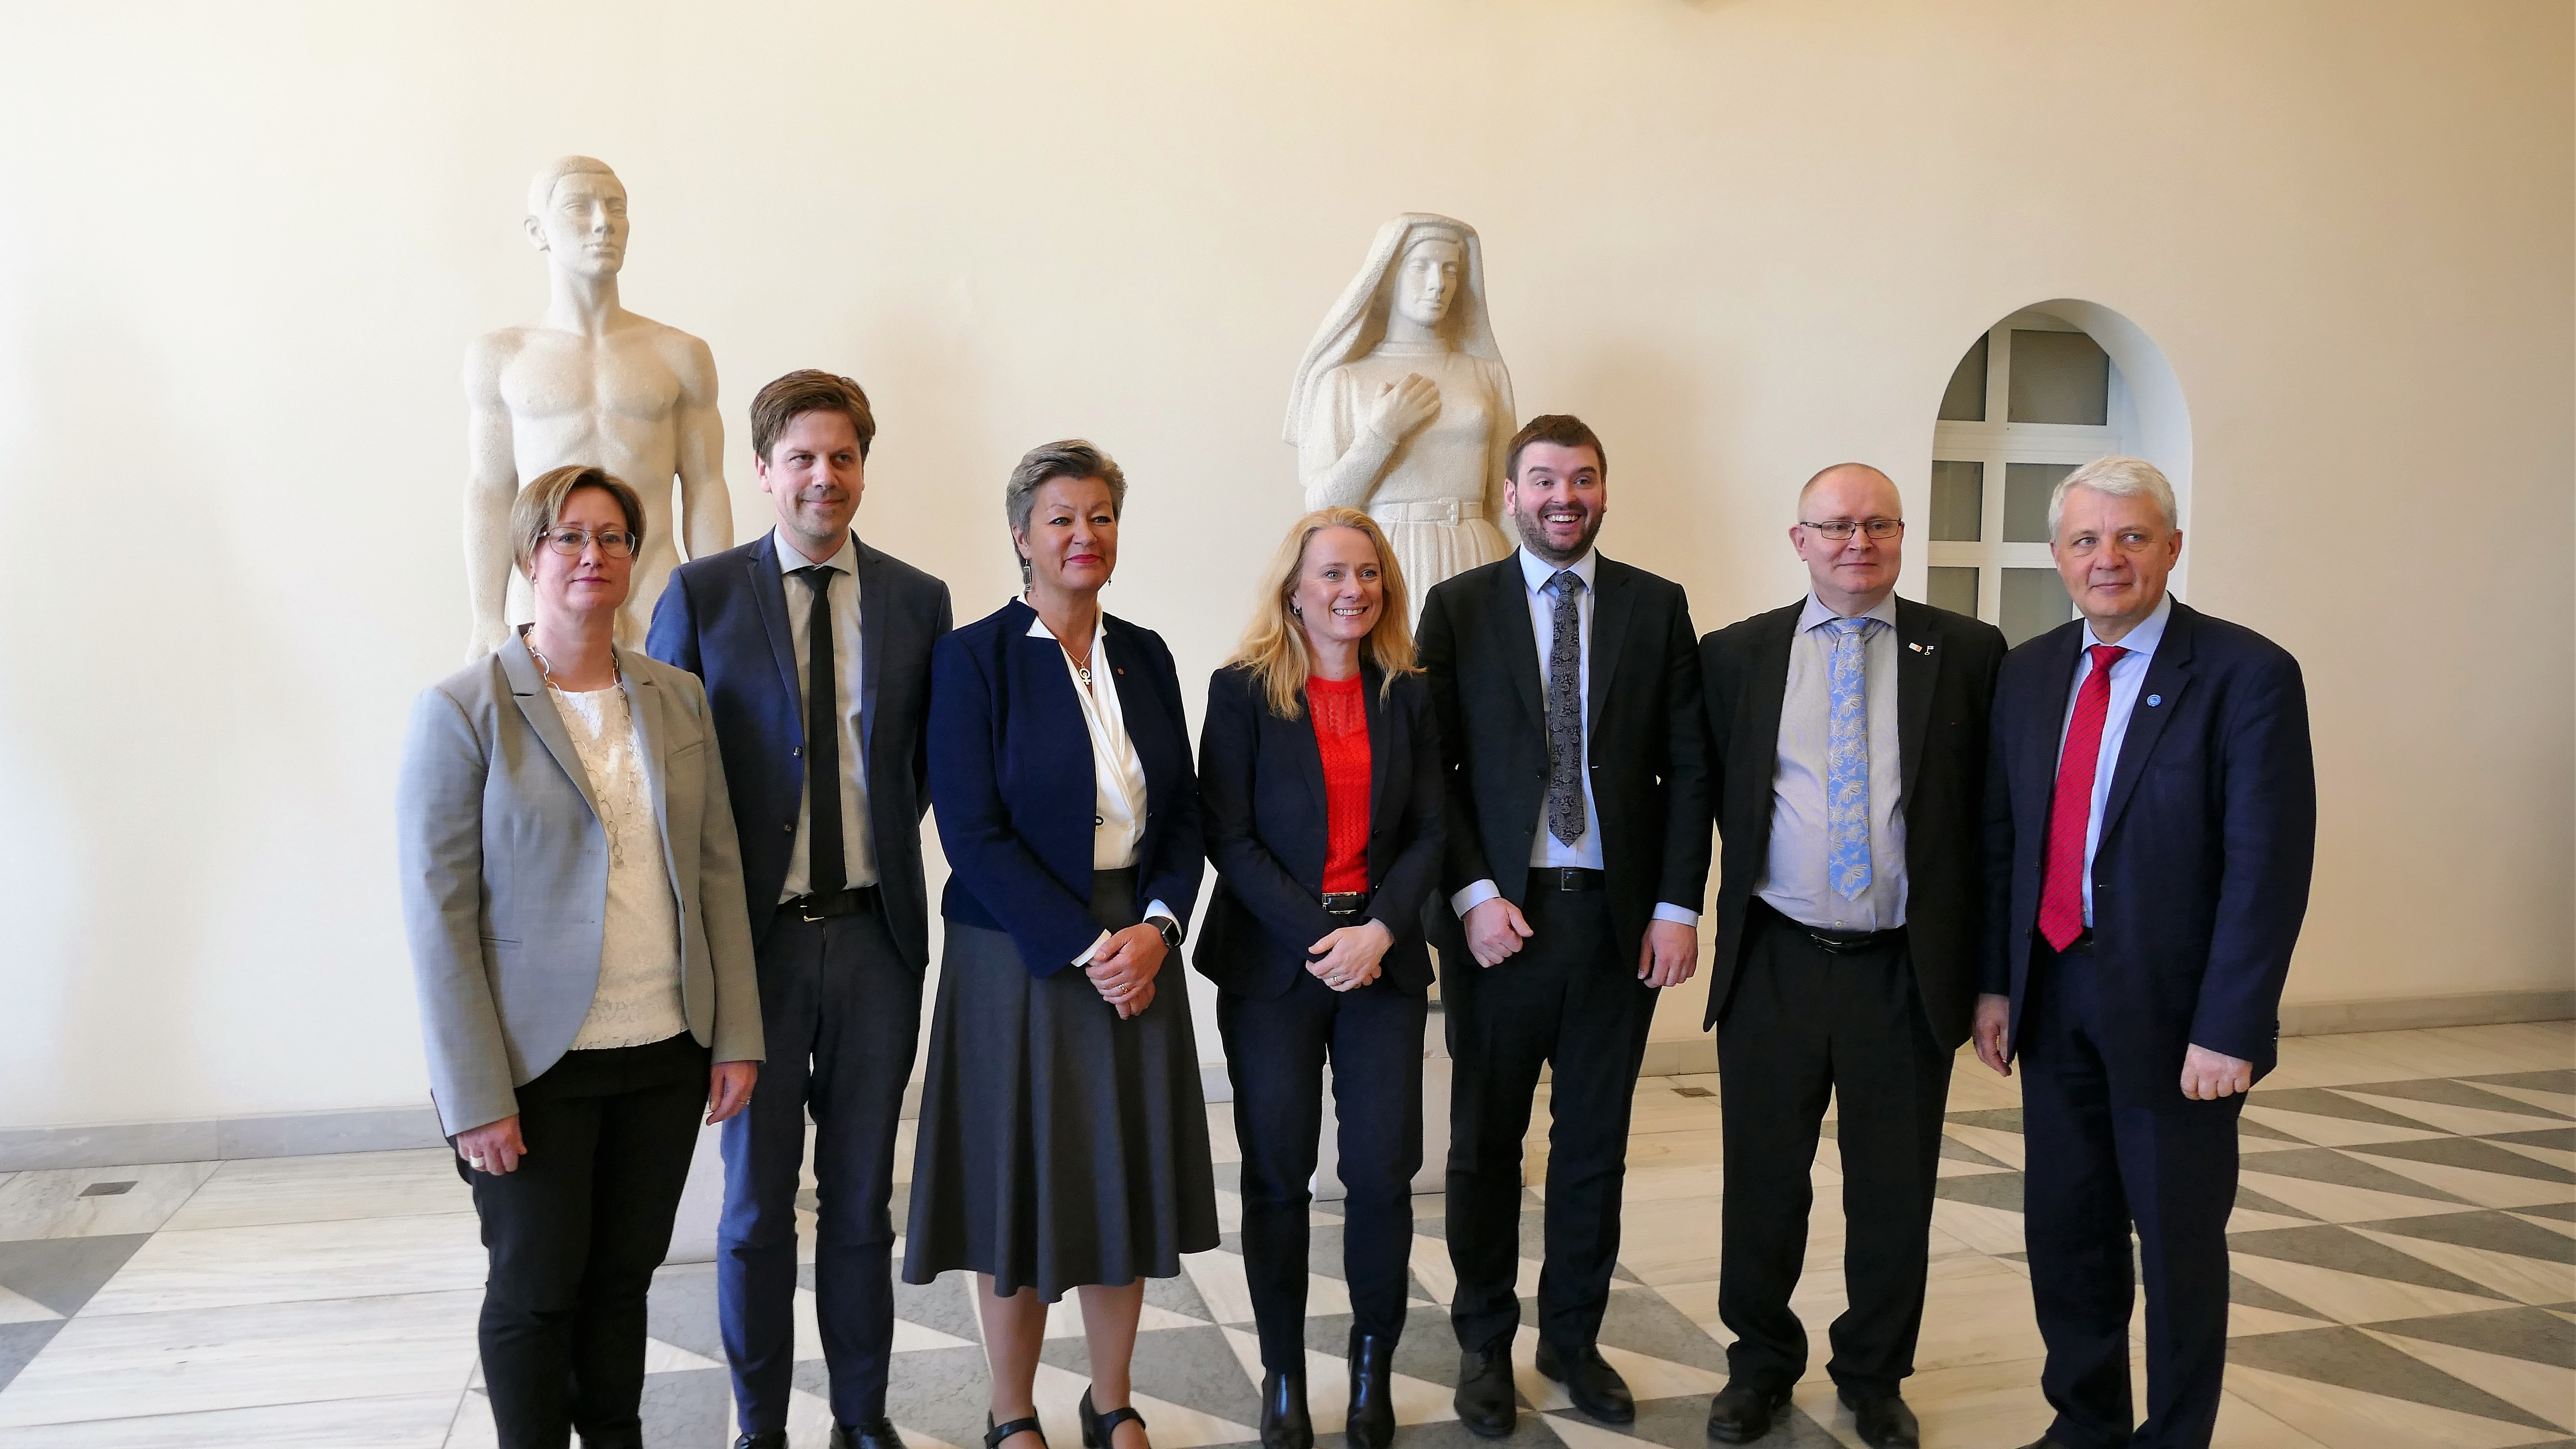 Nordic region strengthens cooperation against work-related crime – wants EU onboard